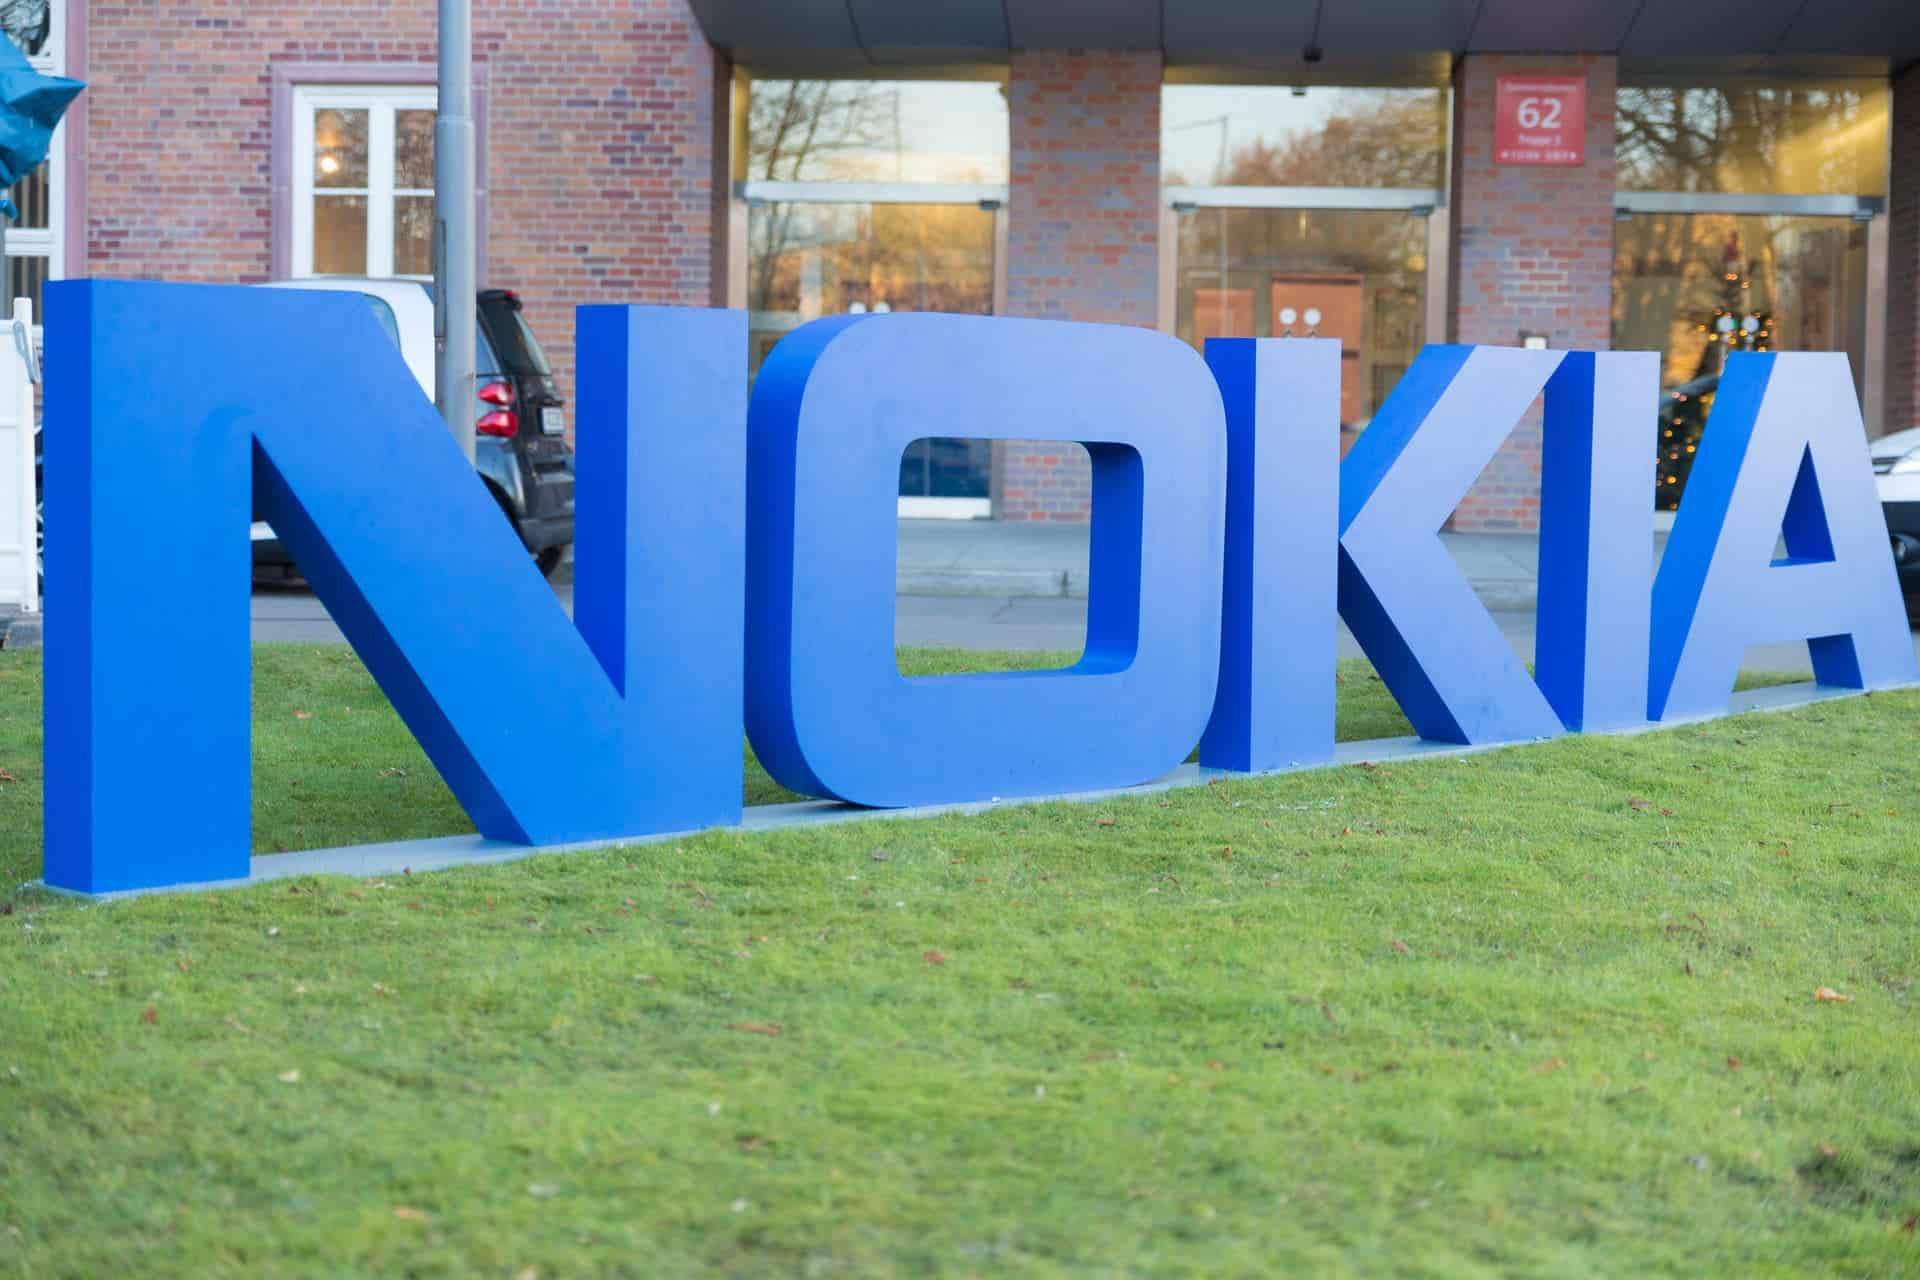 Experience the world renowned Finnish trust and reliability in the all-new Nokia C1 2nd Edition